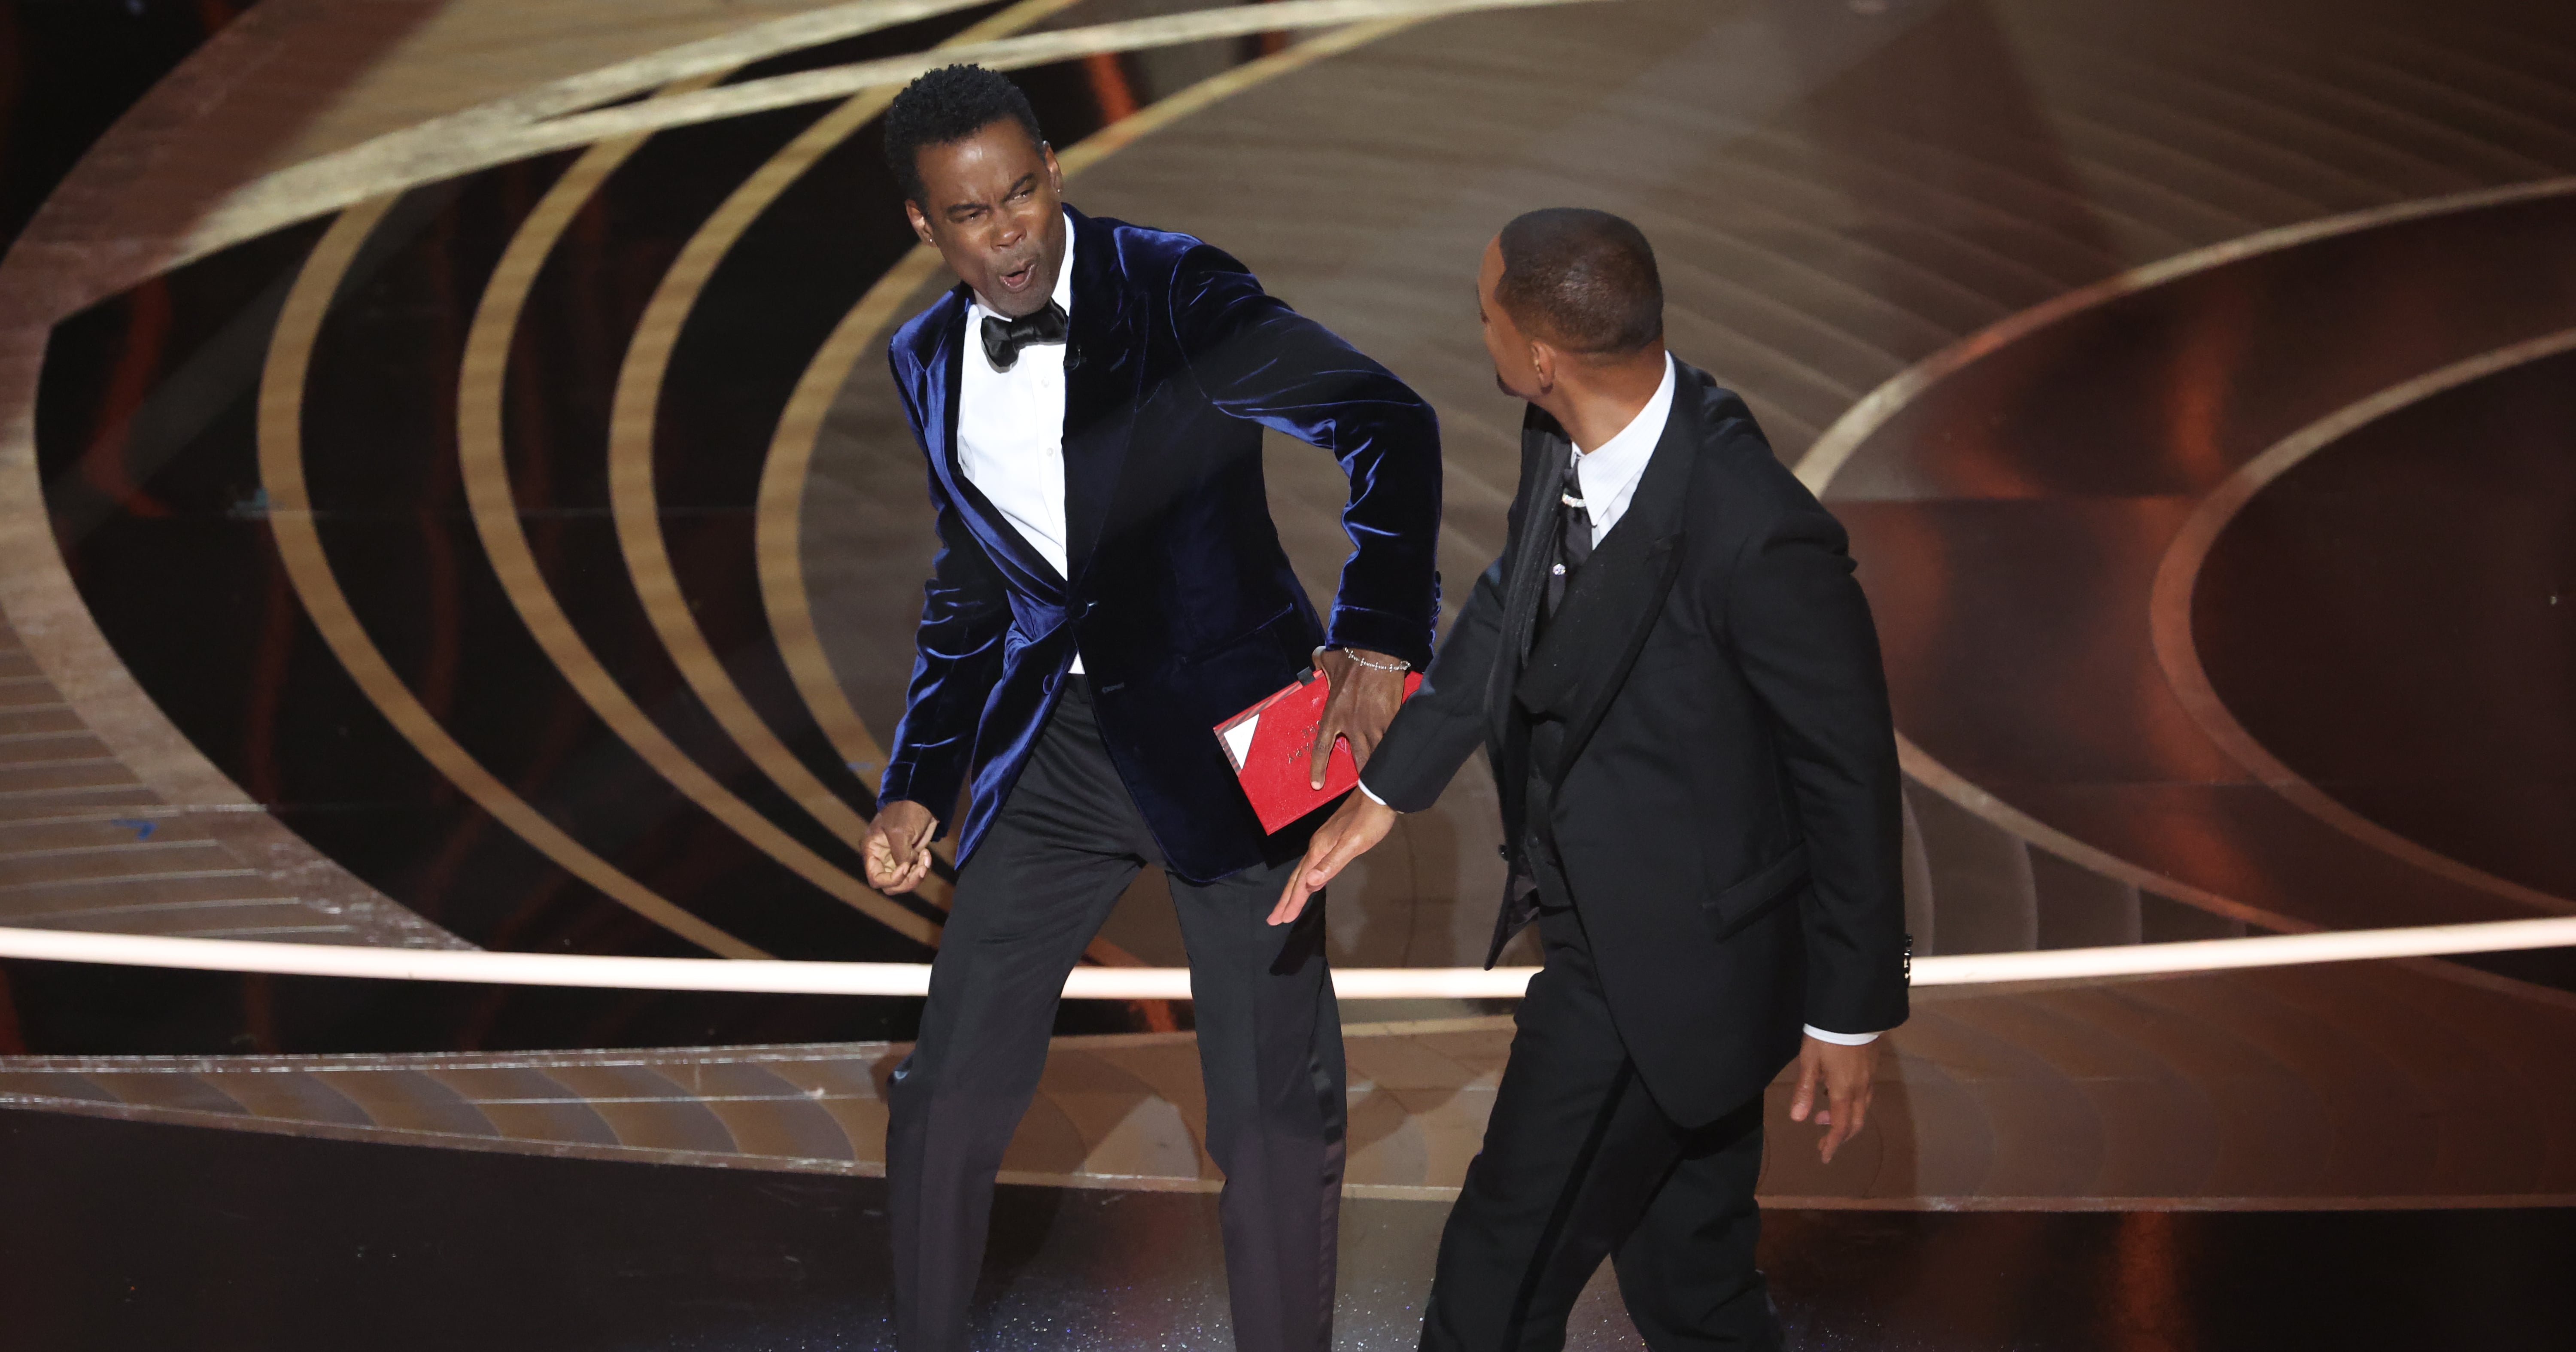 Why Did Will Smith Slap Chris Rock at the Oscars?